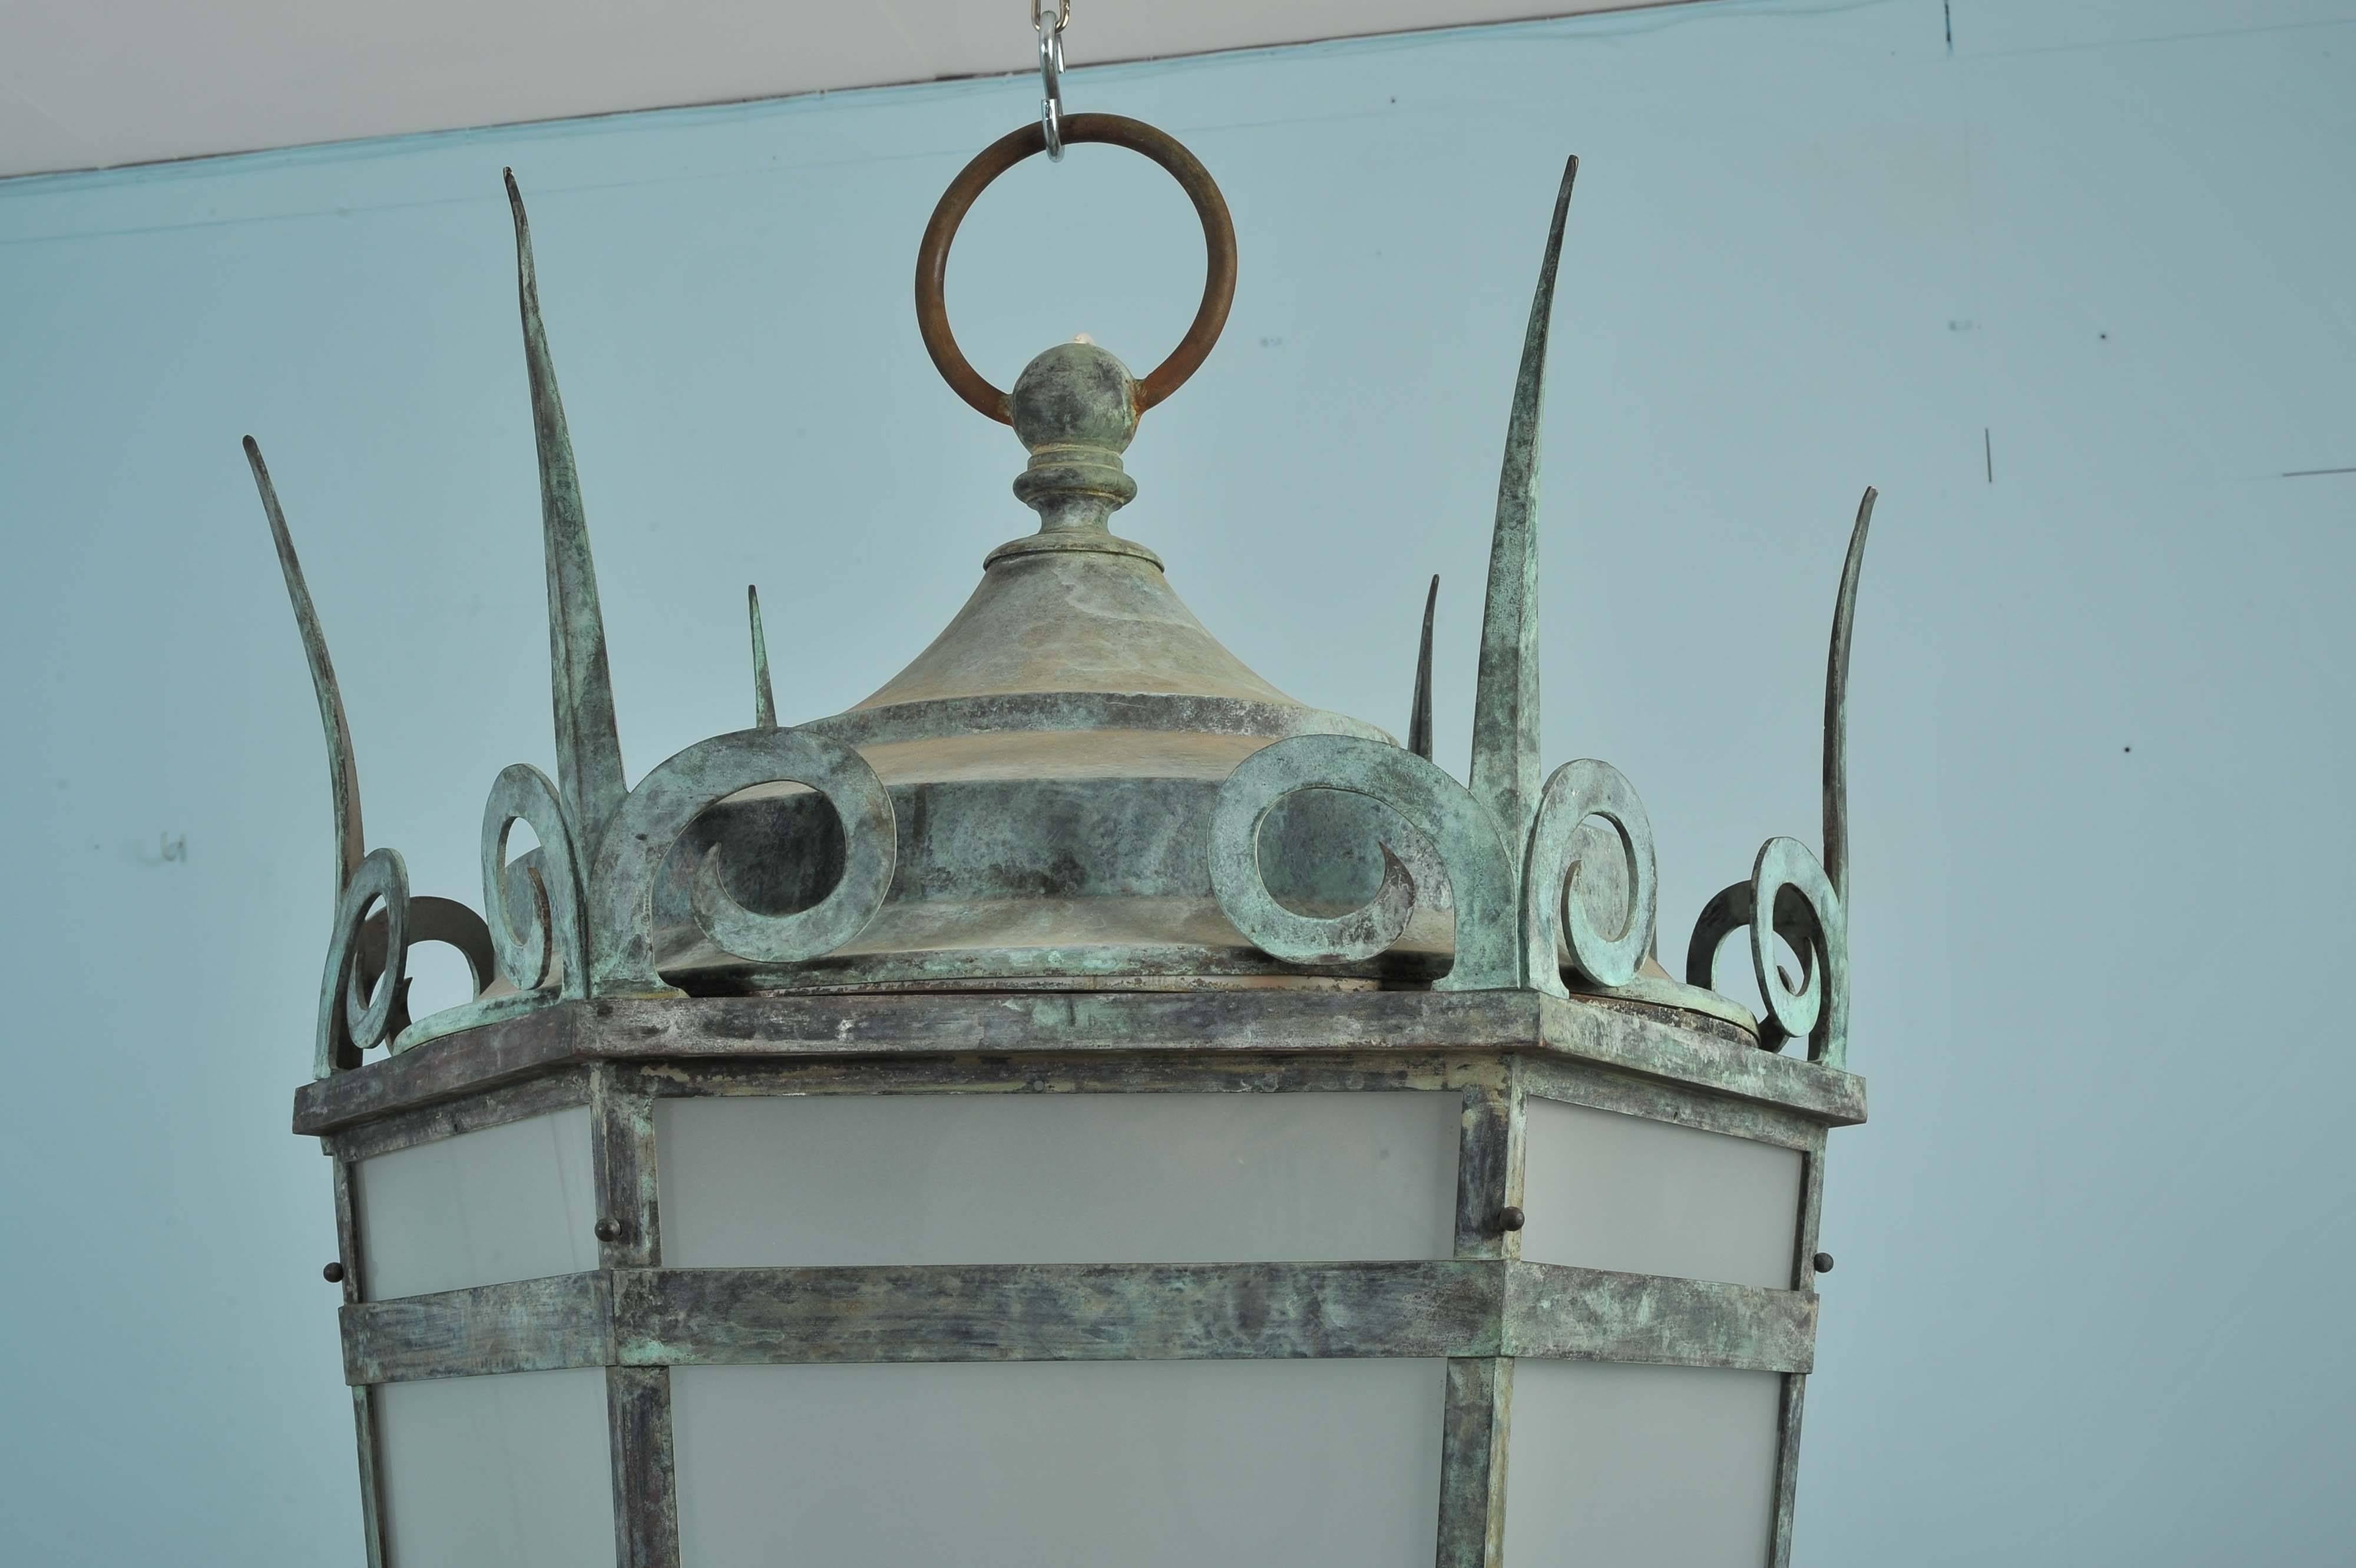 These colossal sized bronze lanterns are English, circa 1900. They have a naturally aged patina frame with frosted white glass panels and a single bayonet light fitting inside. Each lantern measures 32 in – 81.3 cm in diameter with a sizable 64 in -